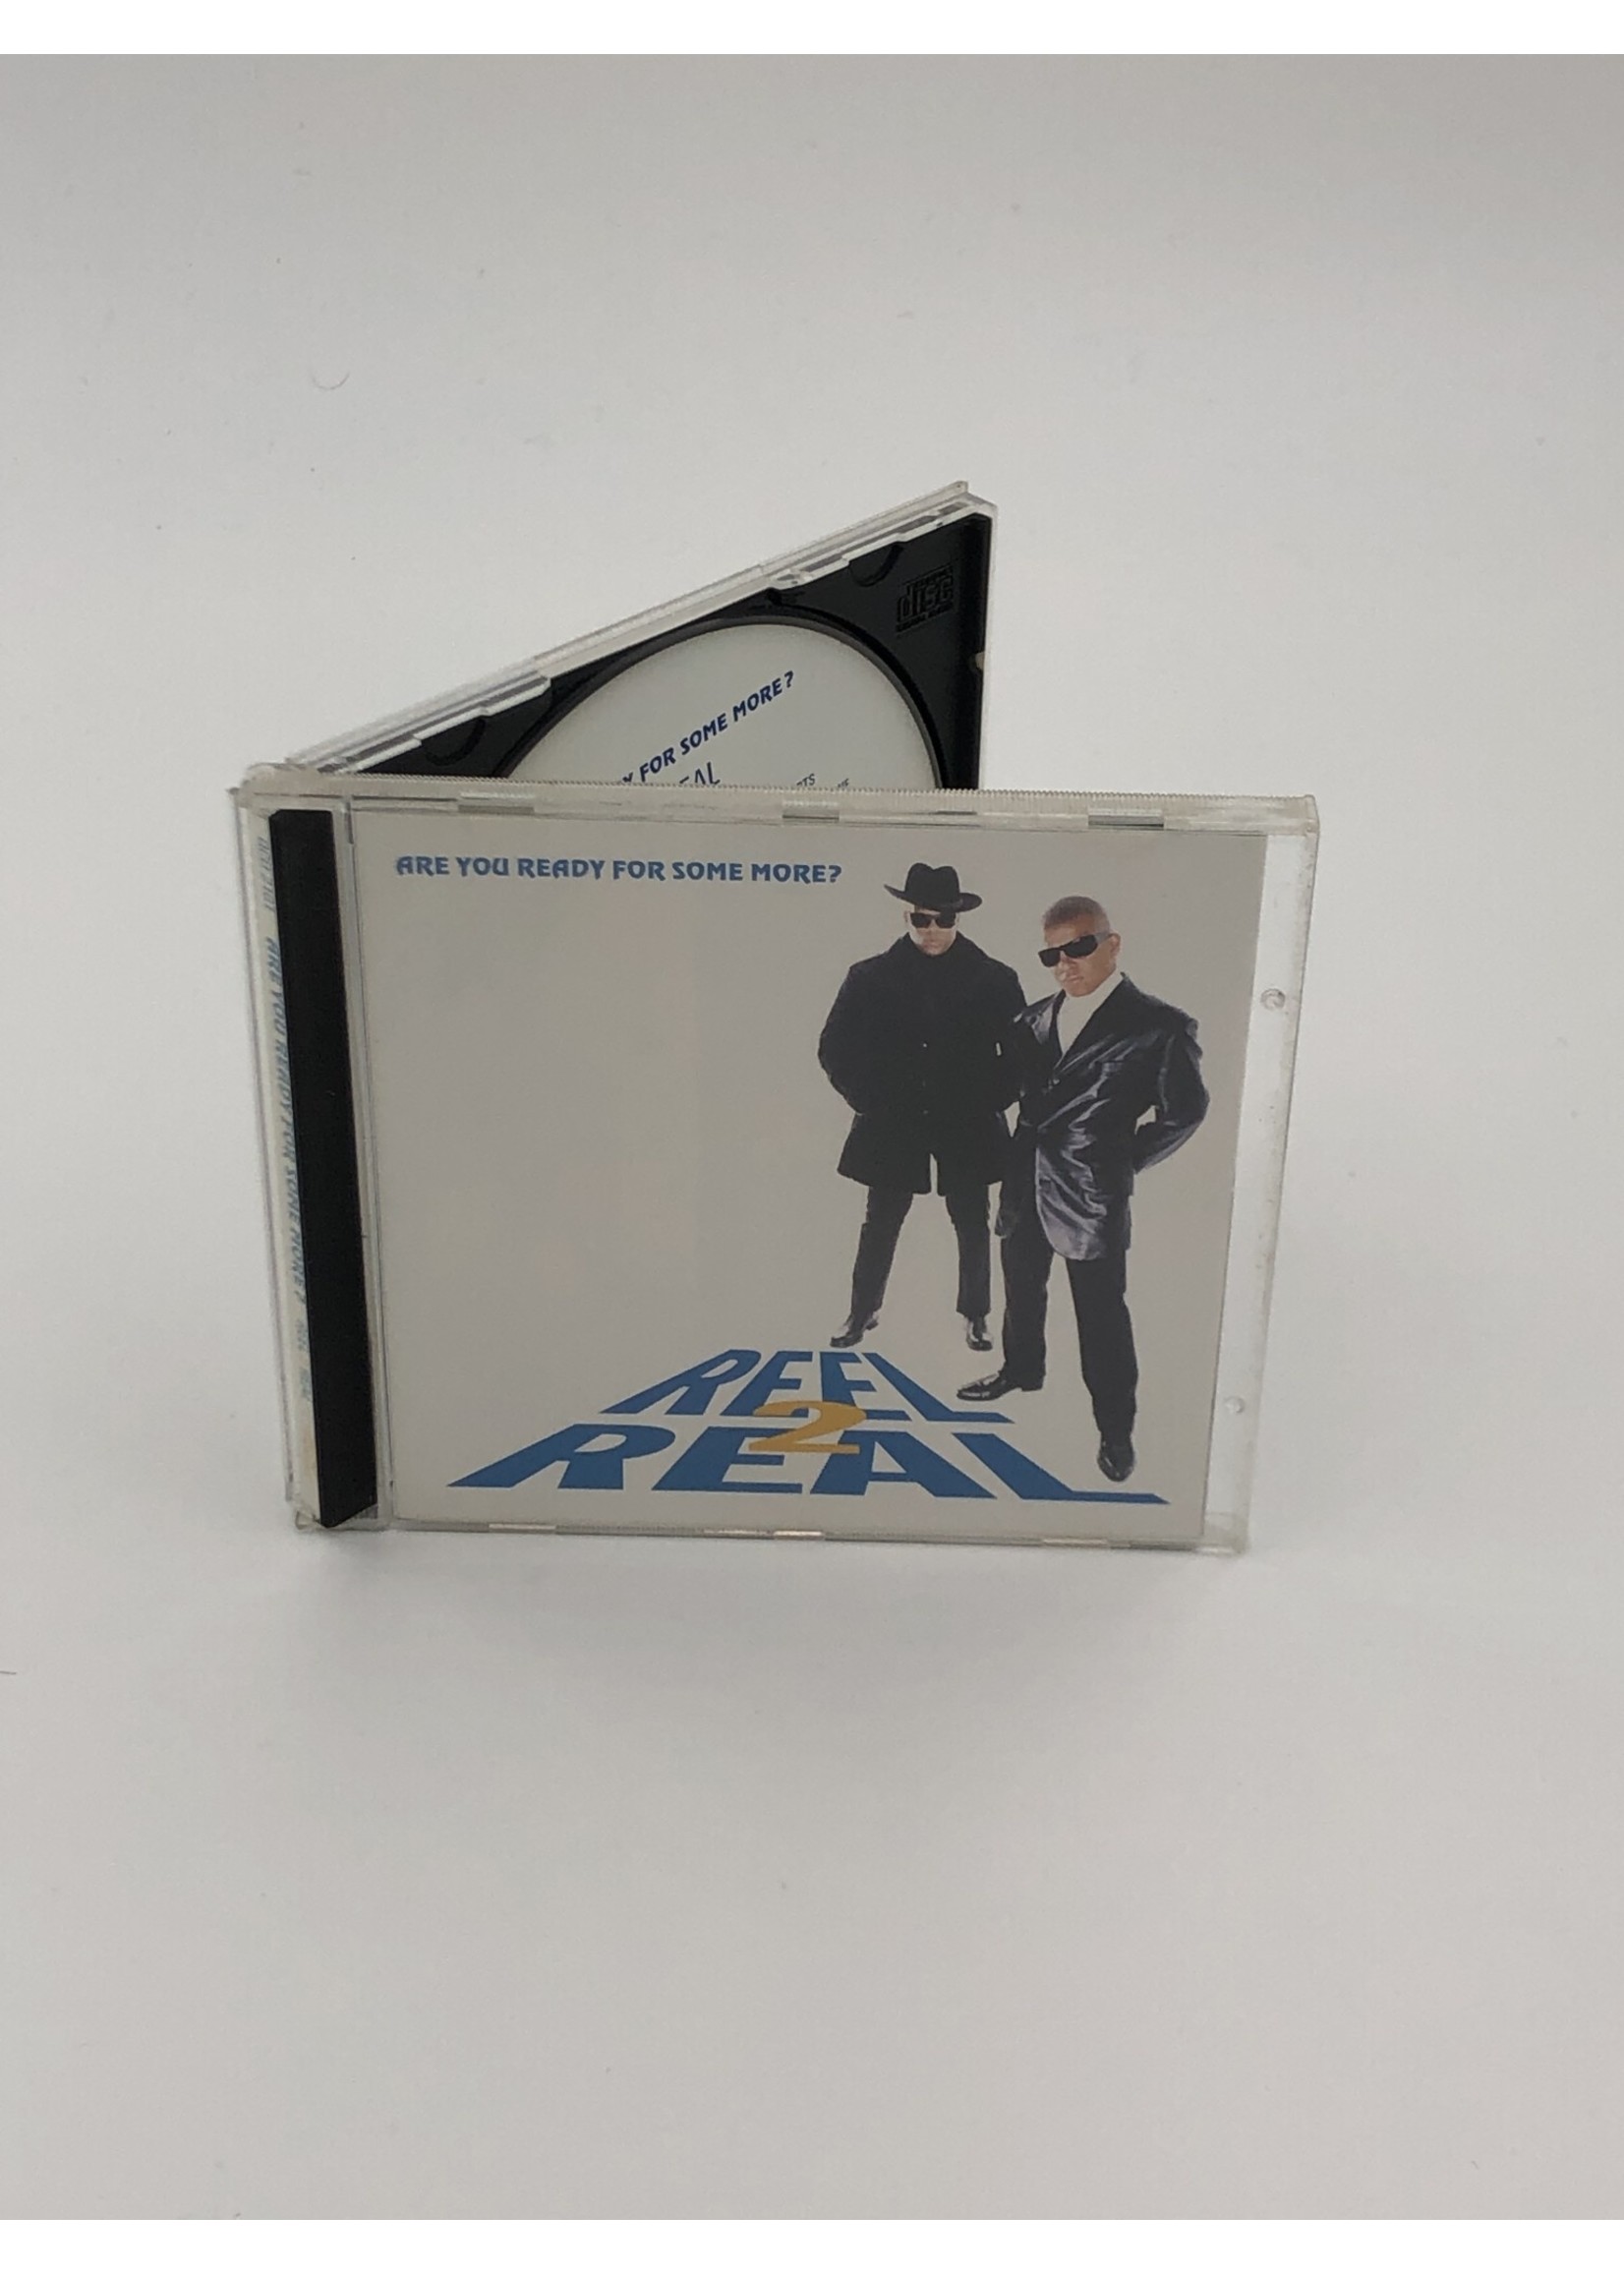 CD Reel 2 Real: Are you Ready for some More CD